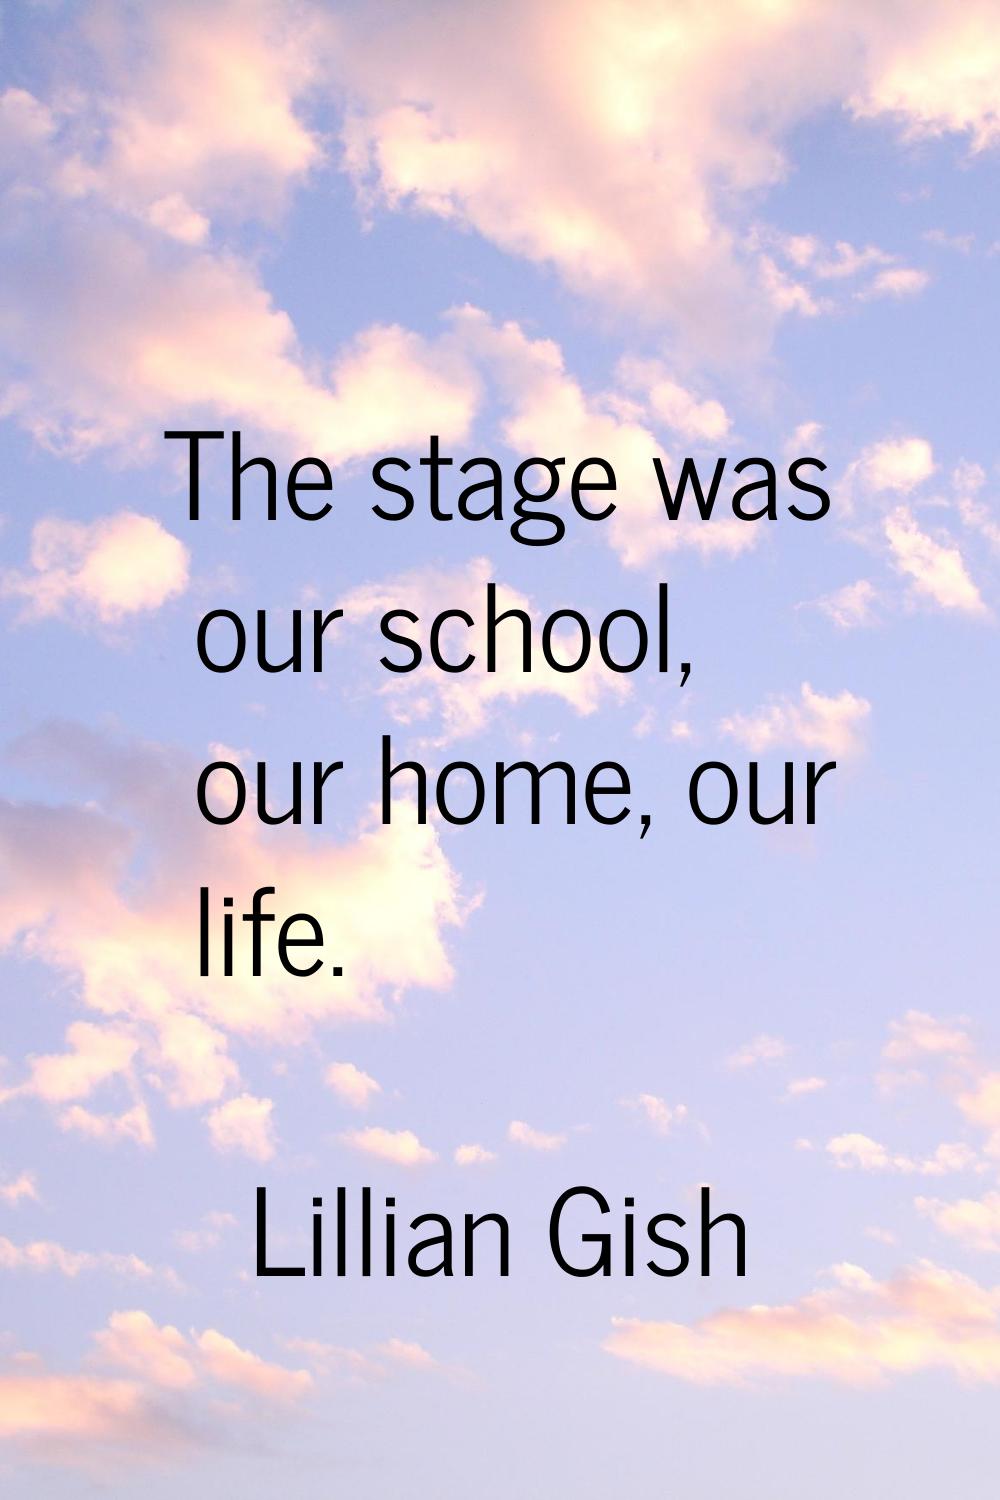 The stage was our school, our home, our life.